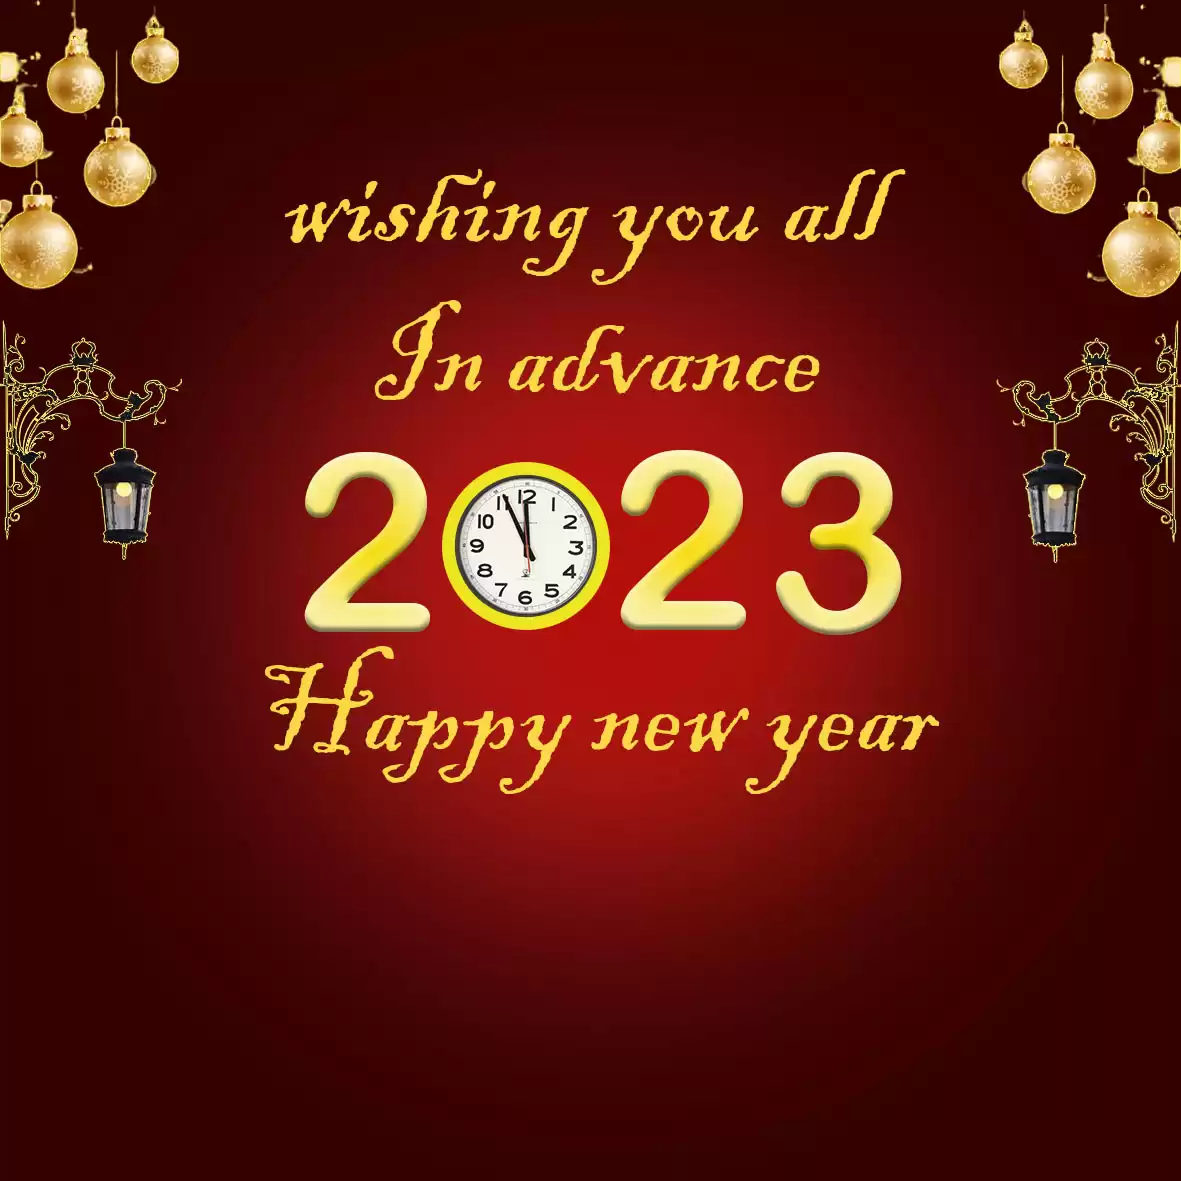 happy new year in advance